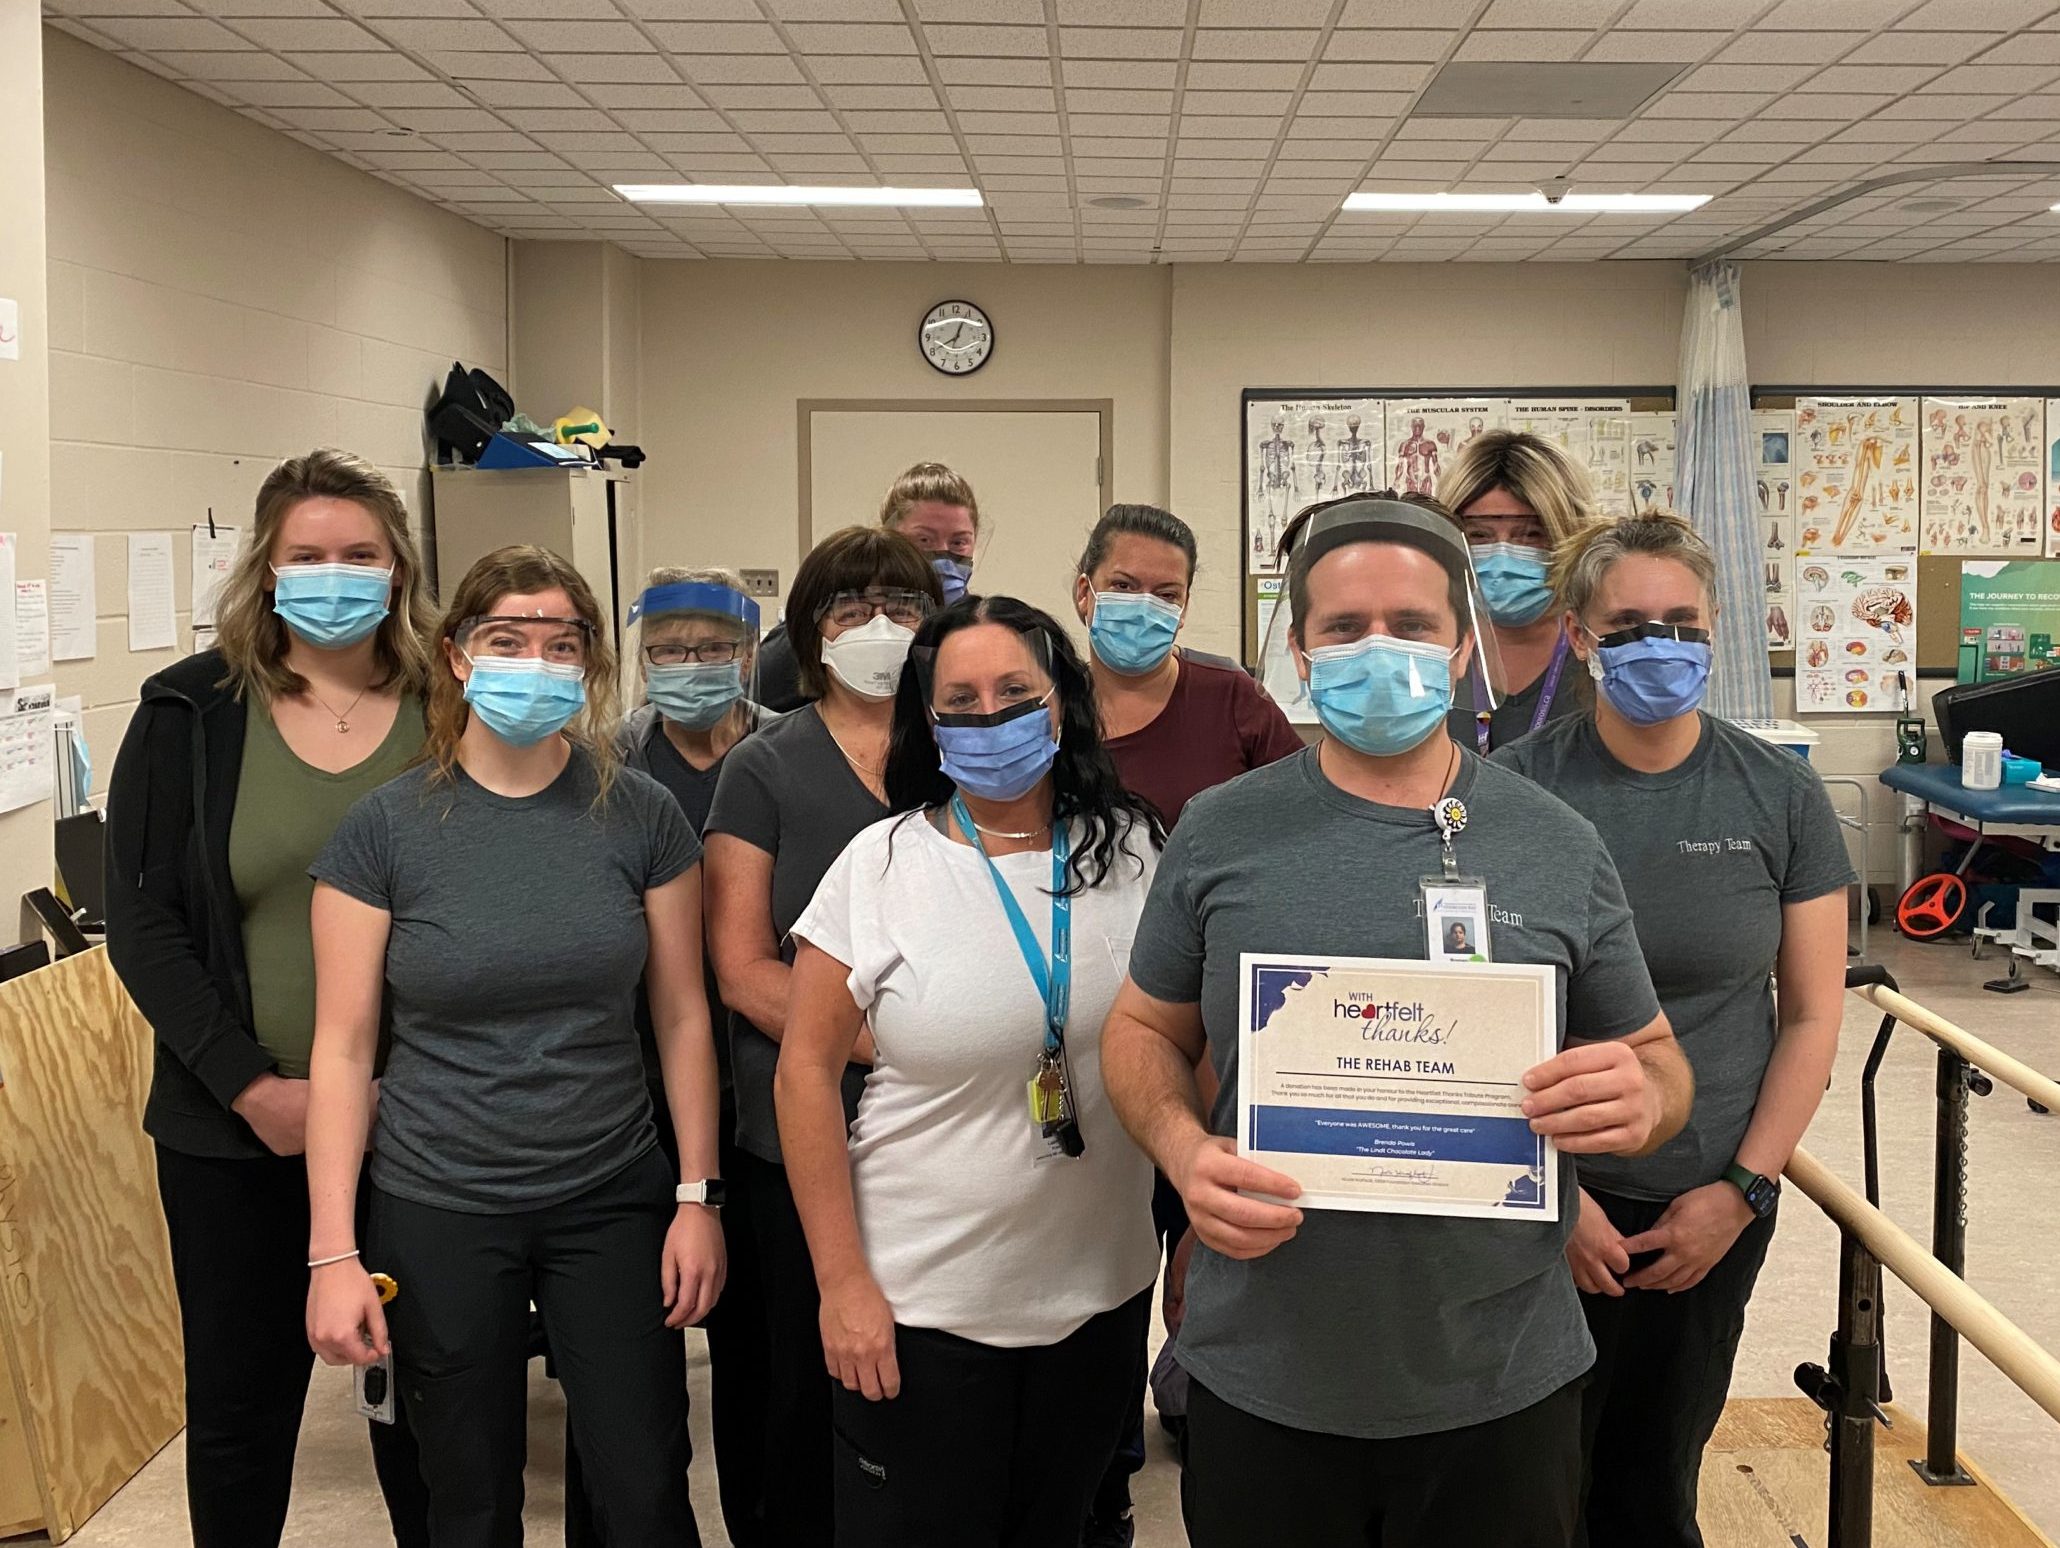 Ten men and woman wearing masks hold up a Heartfelt Thanks certificate for the Rehab Team